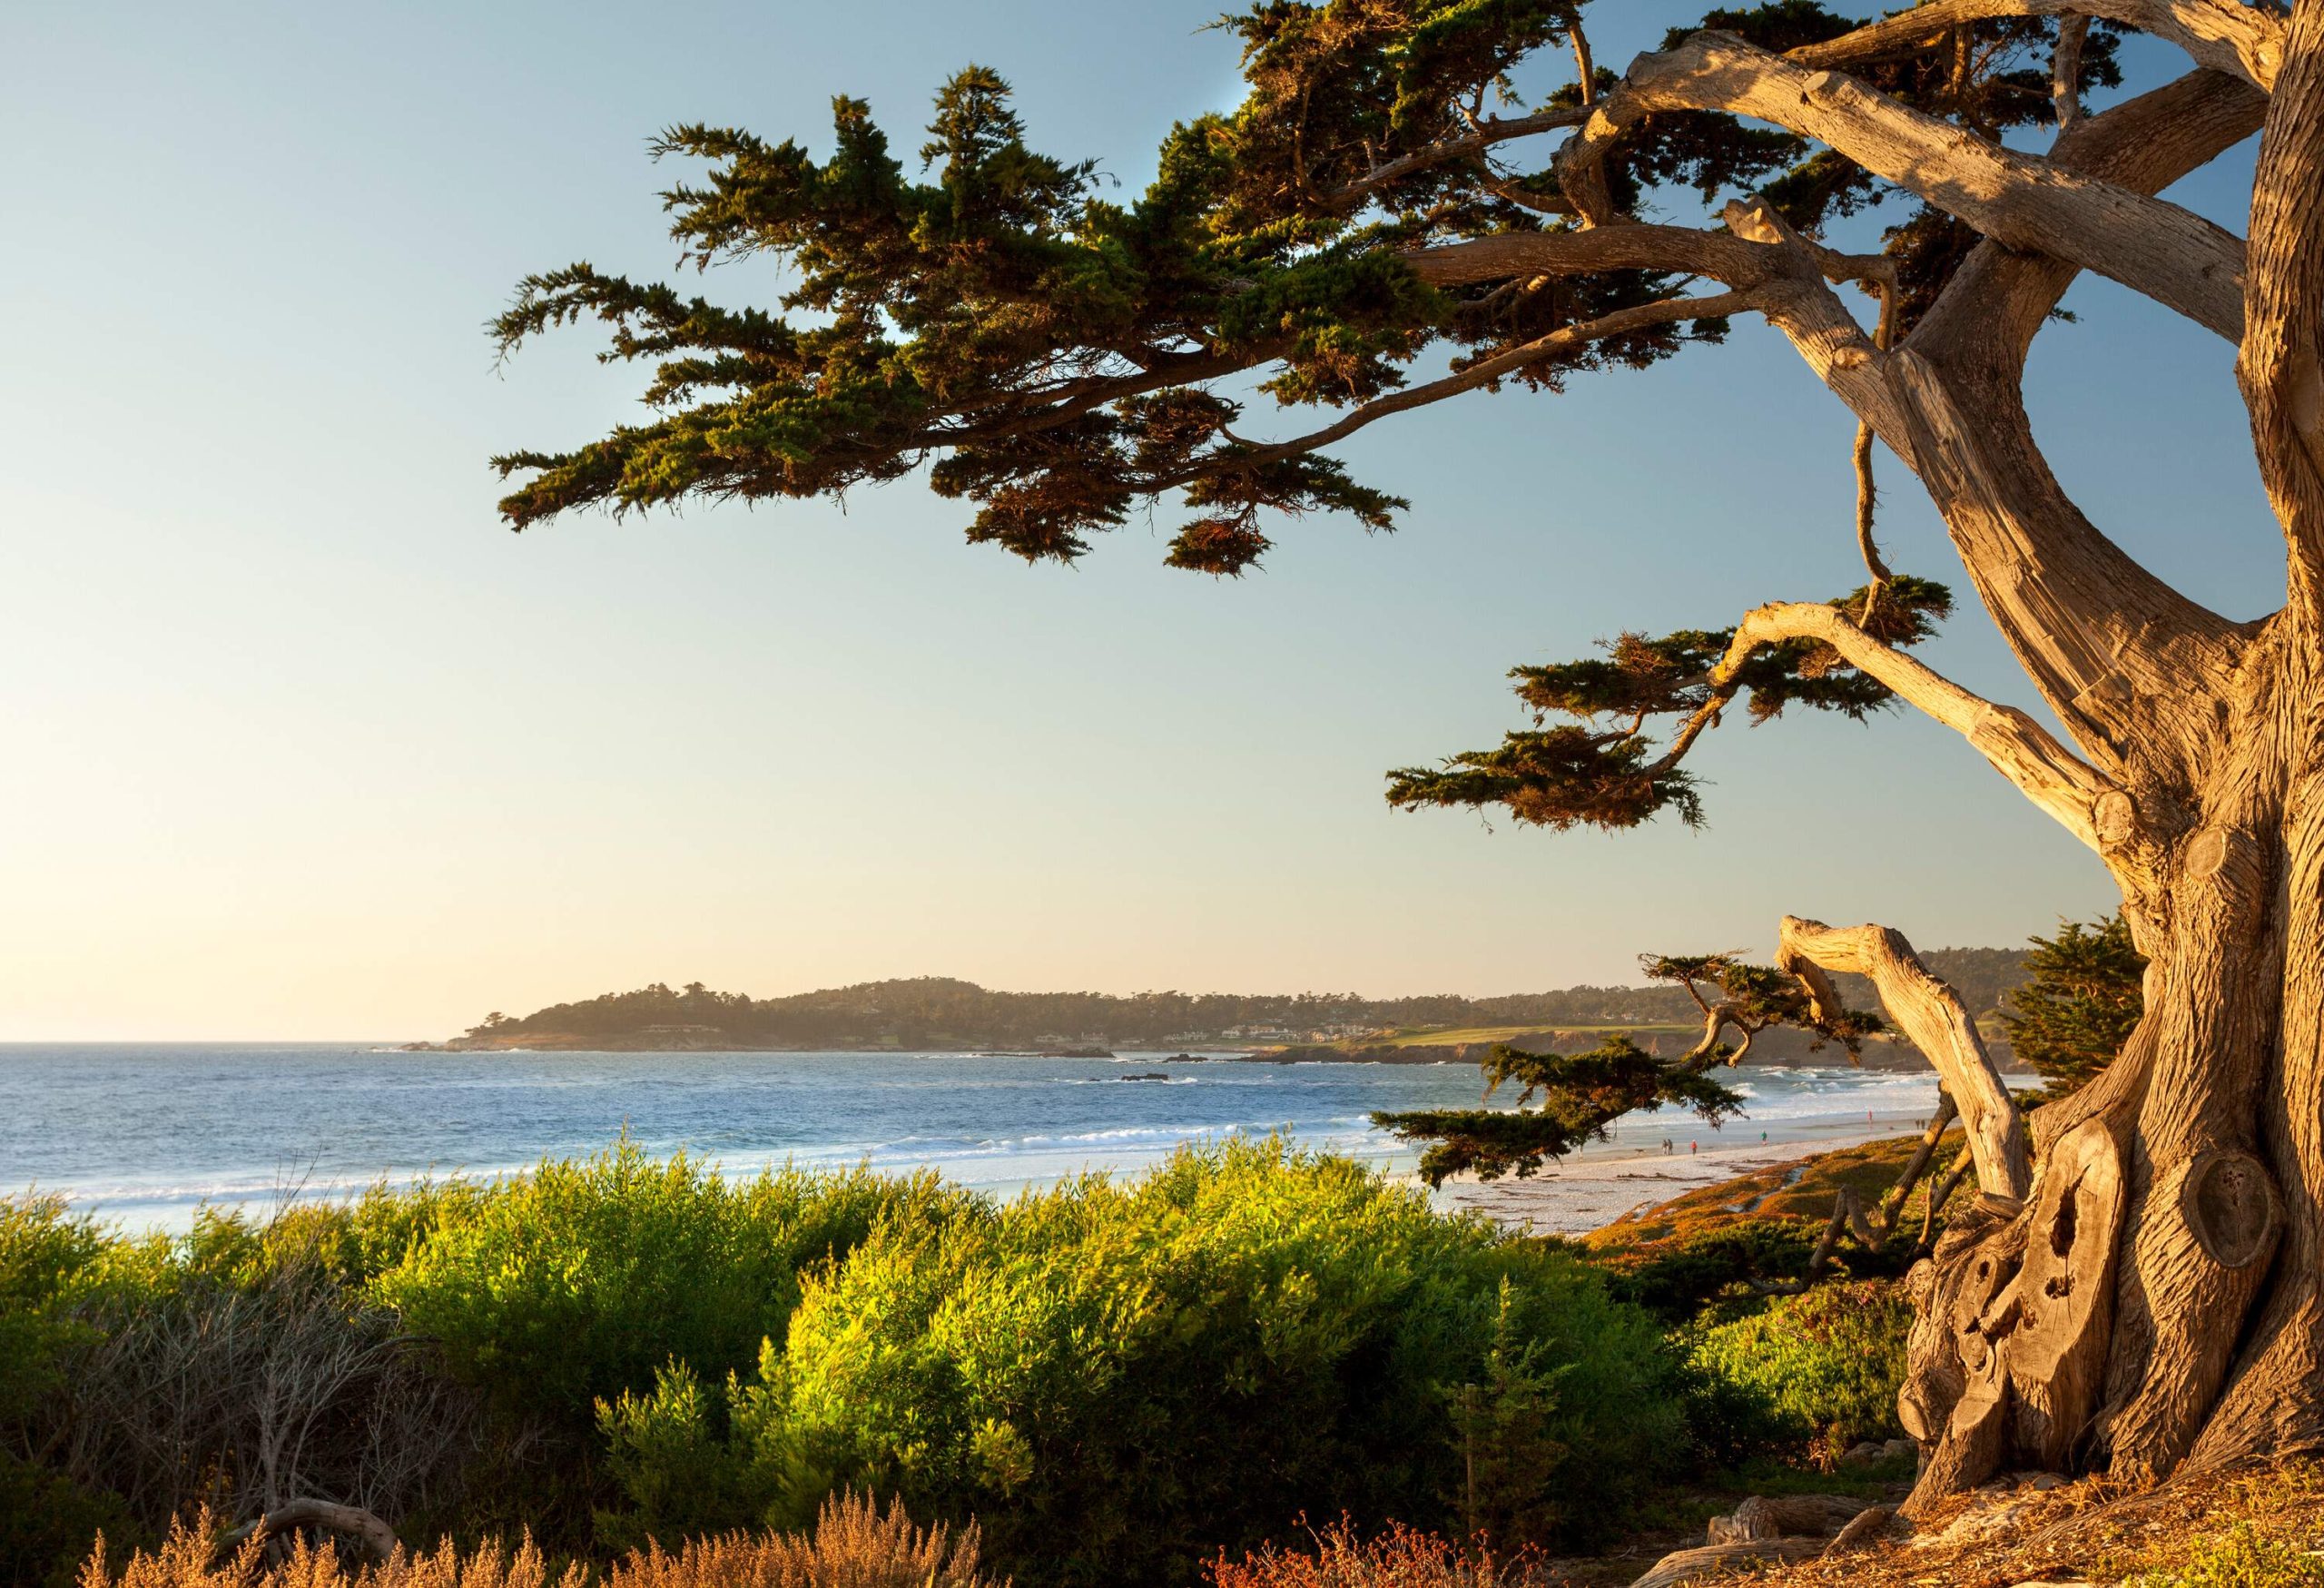 Green shrubbery and an aged tree create a picturesque frame in the foreground, while the tranquil coast stretches ahead, revealing the shimmering waters that separate it from the rolling hills in the background.